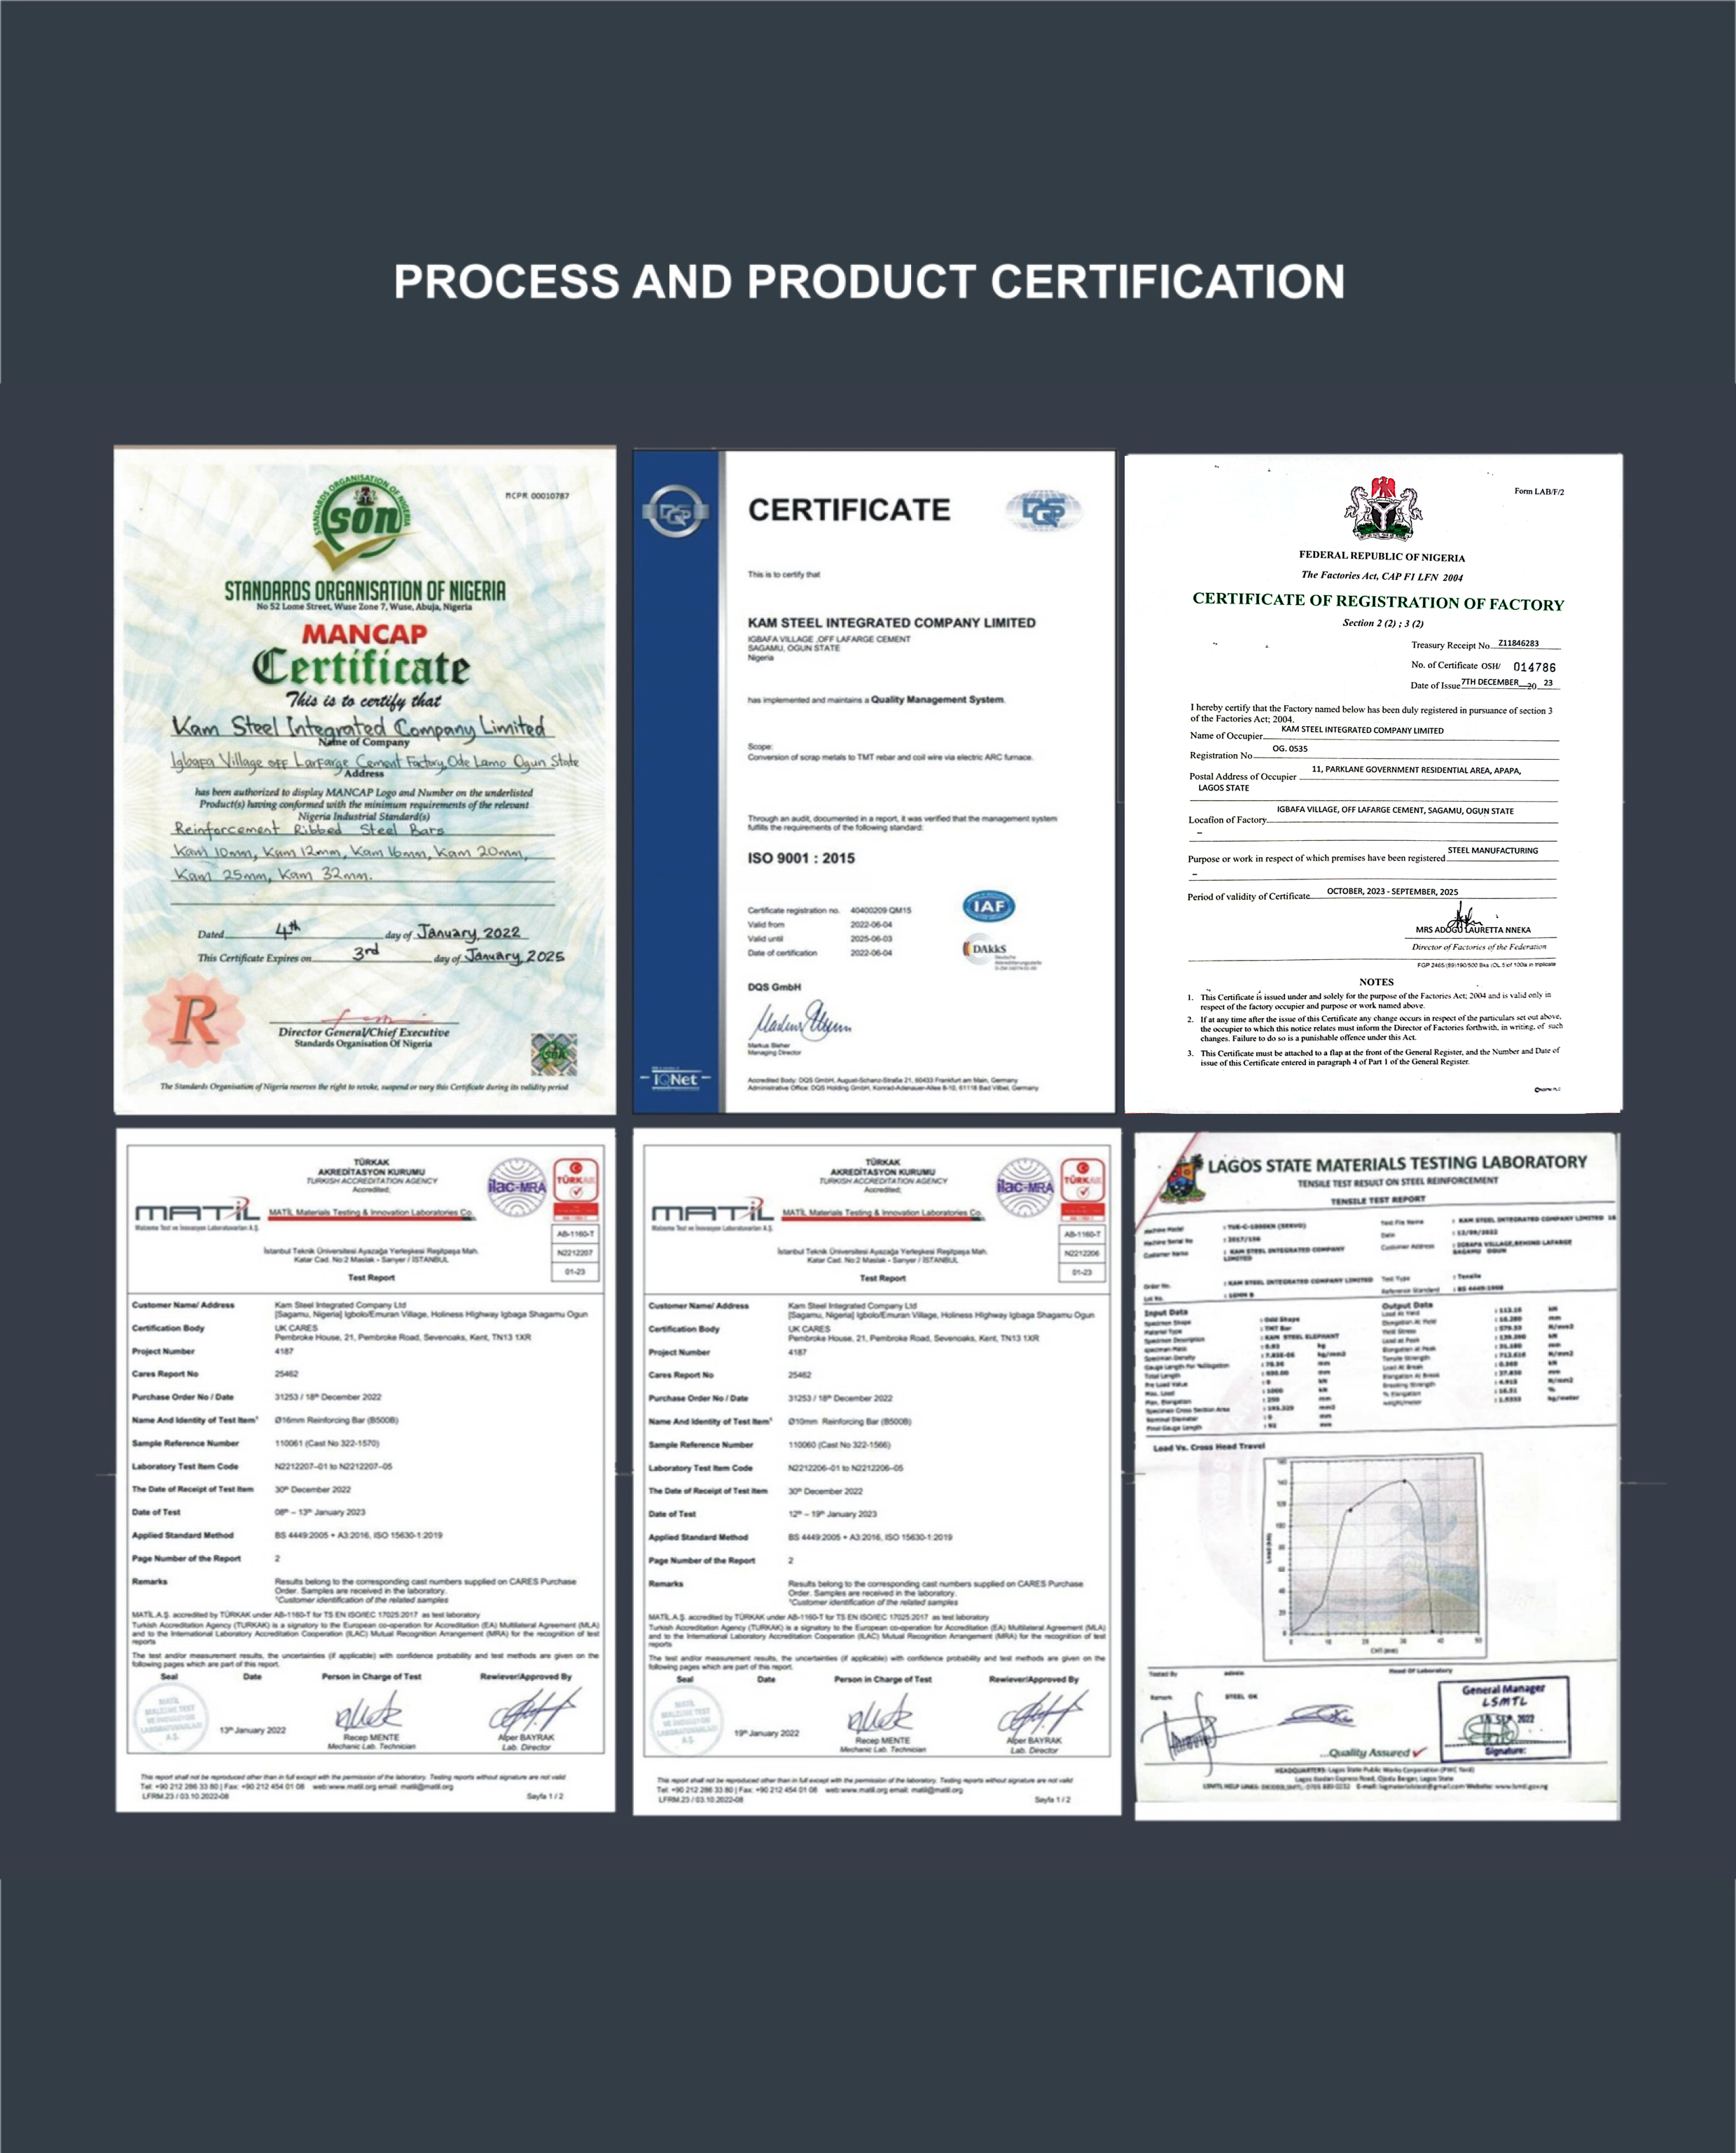 Process and Product Certification